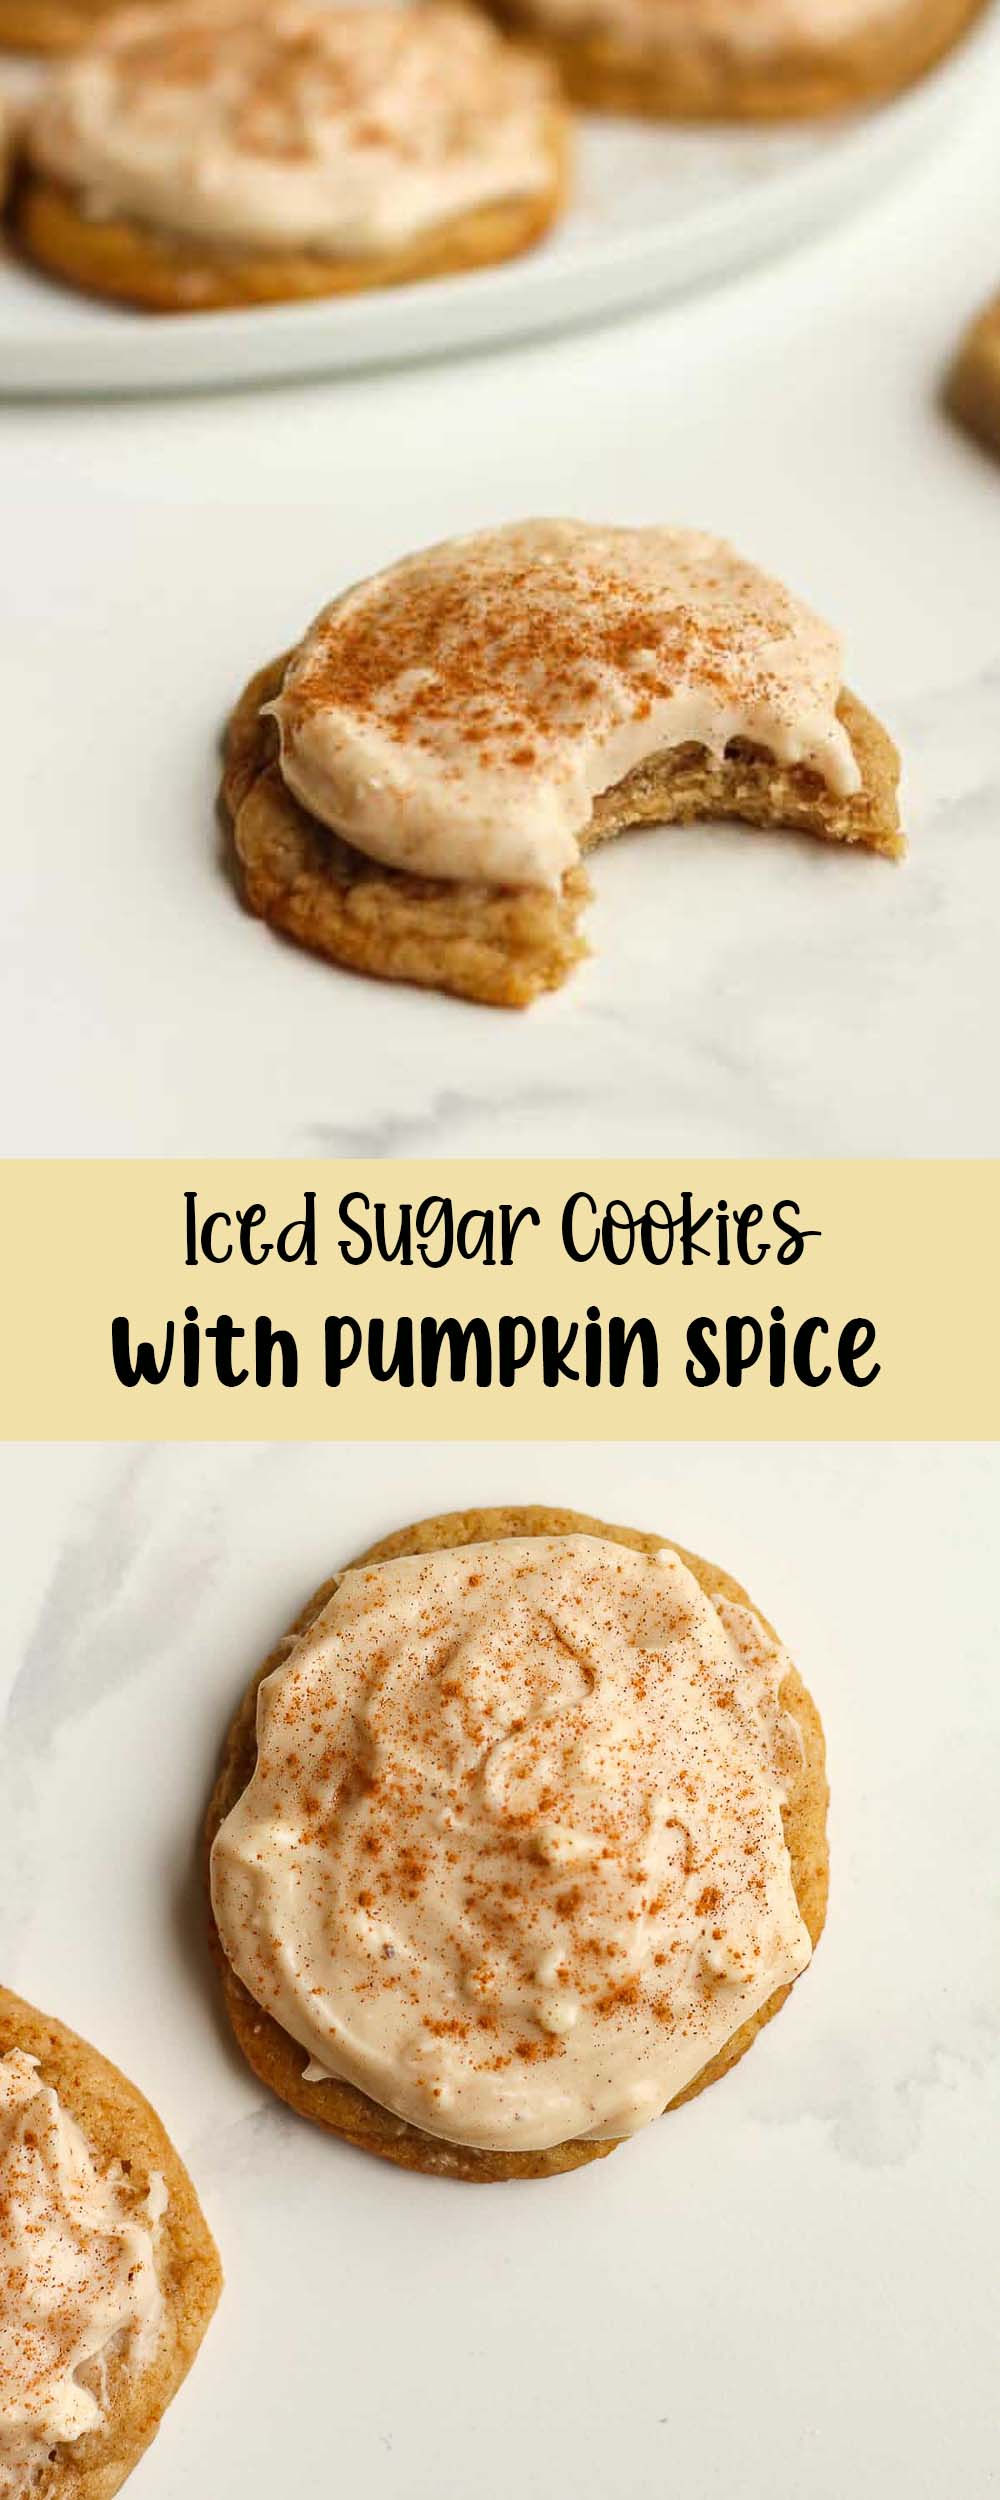 Two photos of iced sugar cookies with pumpkin spice.